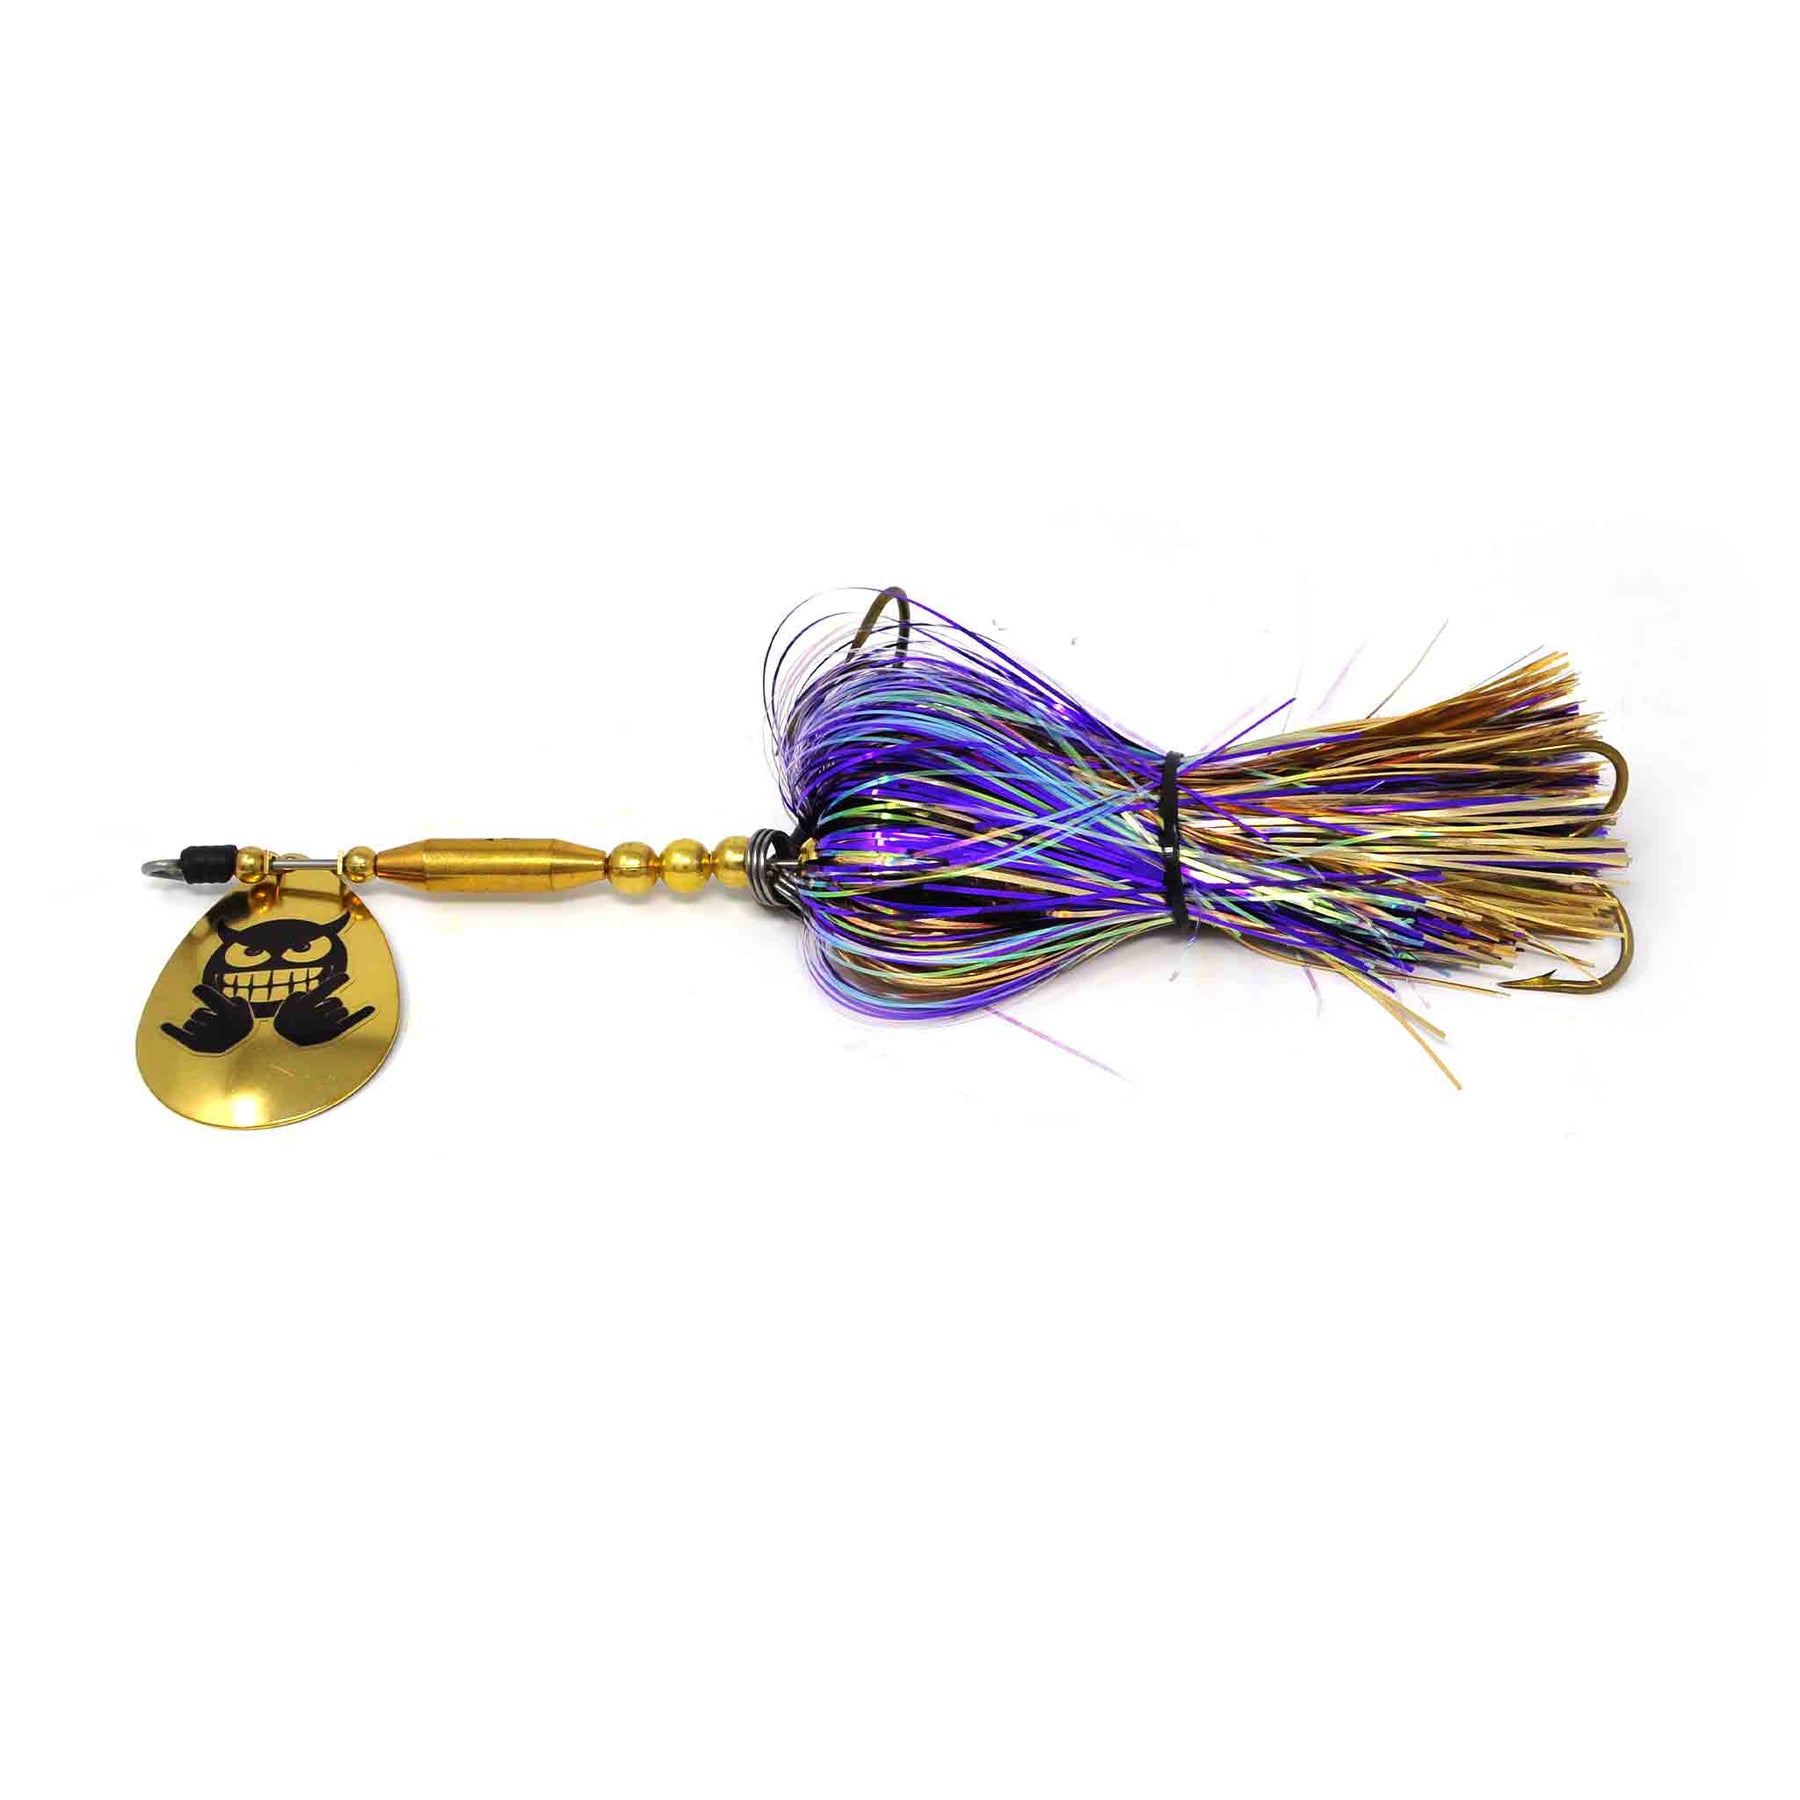 View of Bucktails Mad Chasse Mini Single Colorado 8 Bucktail June Bug available at EZOKO Pike and Musky Shop